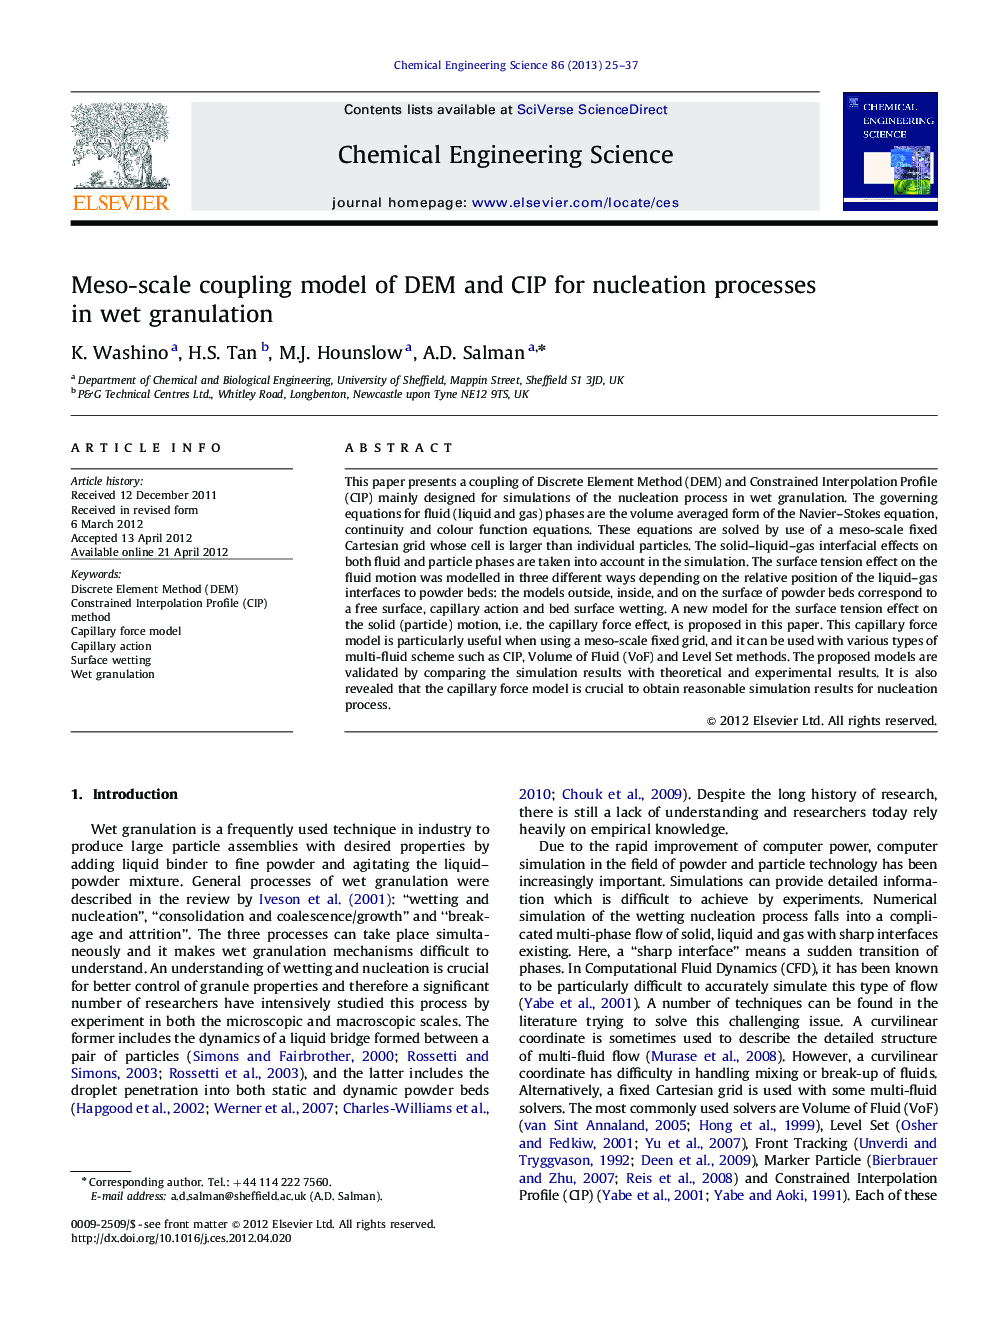 Meso-scale coupling model of DEM and CIP for nucleation processes in wet granulation